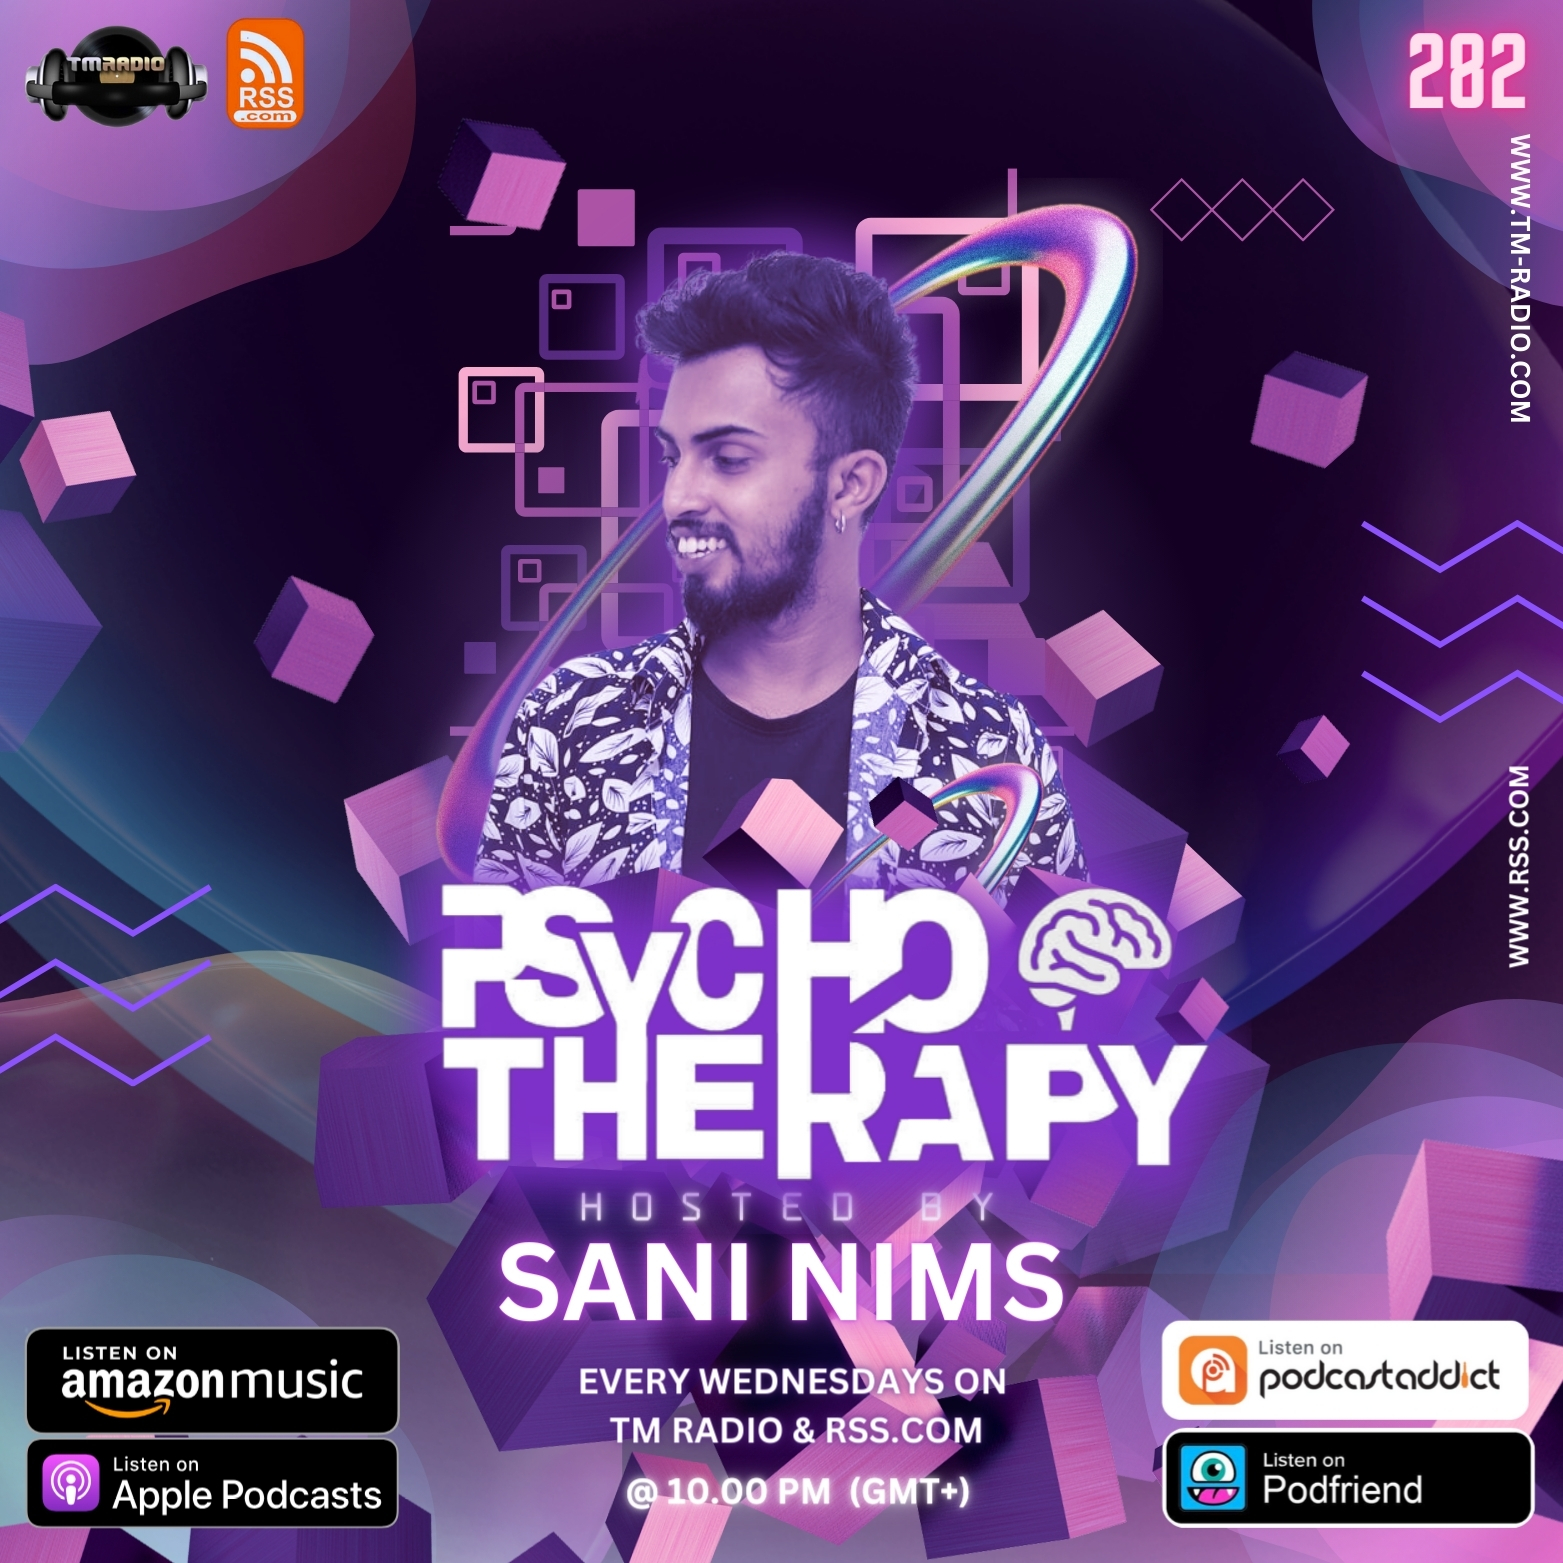 PSYCHO THERAPY EP 282 BY SANI NIMS ON TM RADIO (from February 28th)